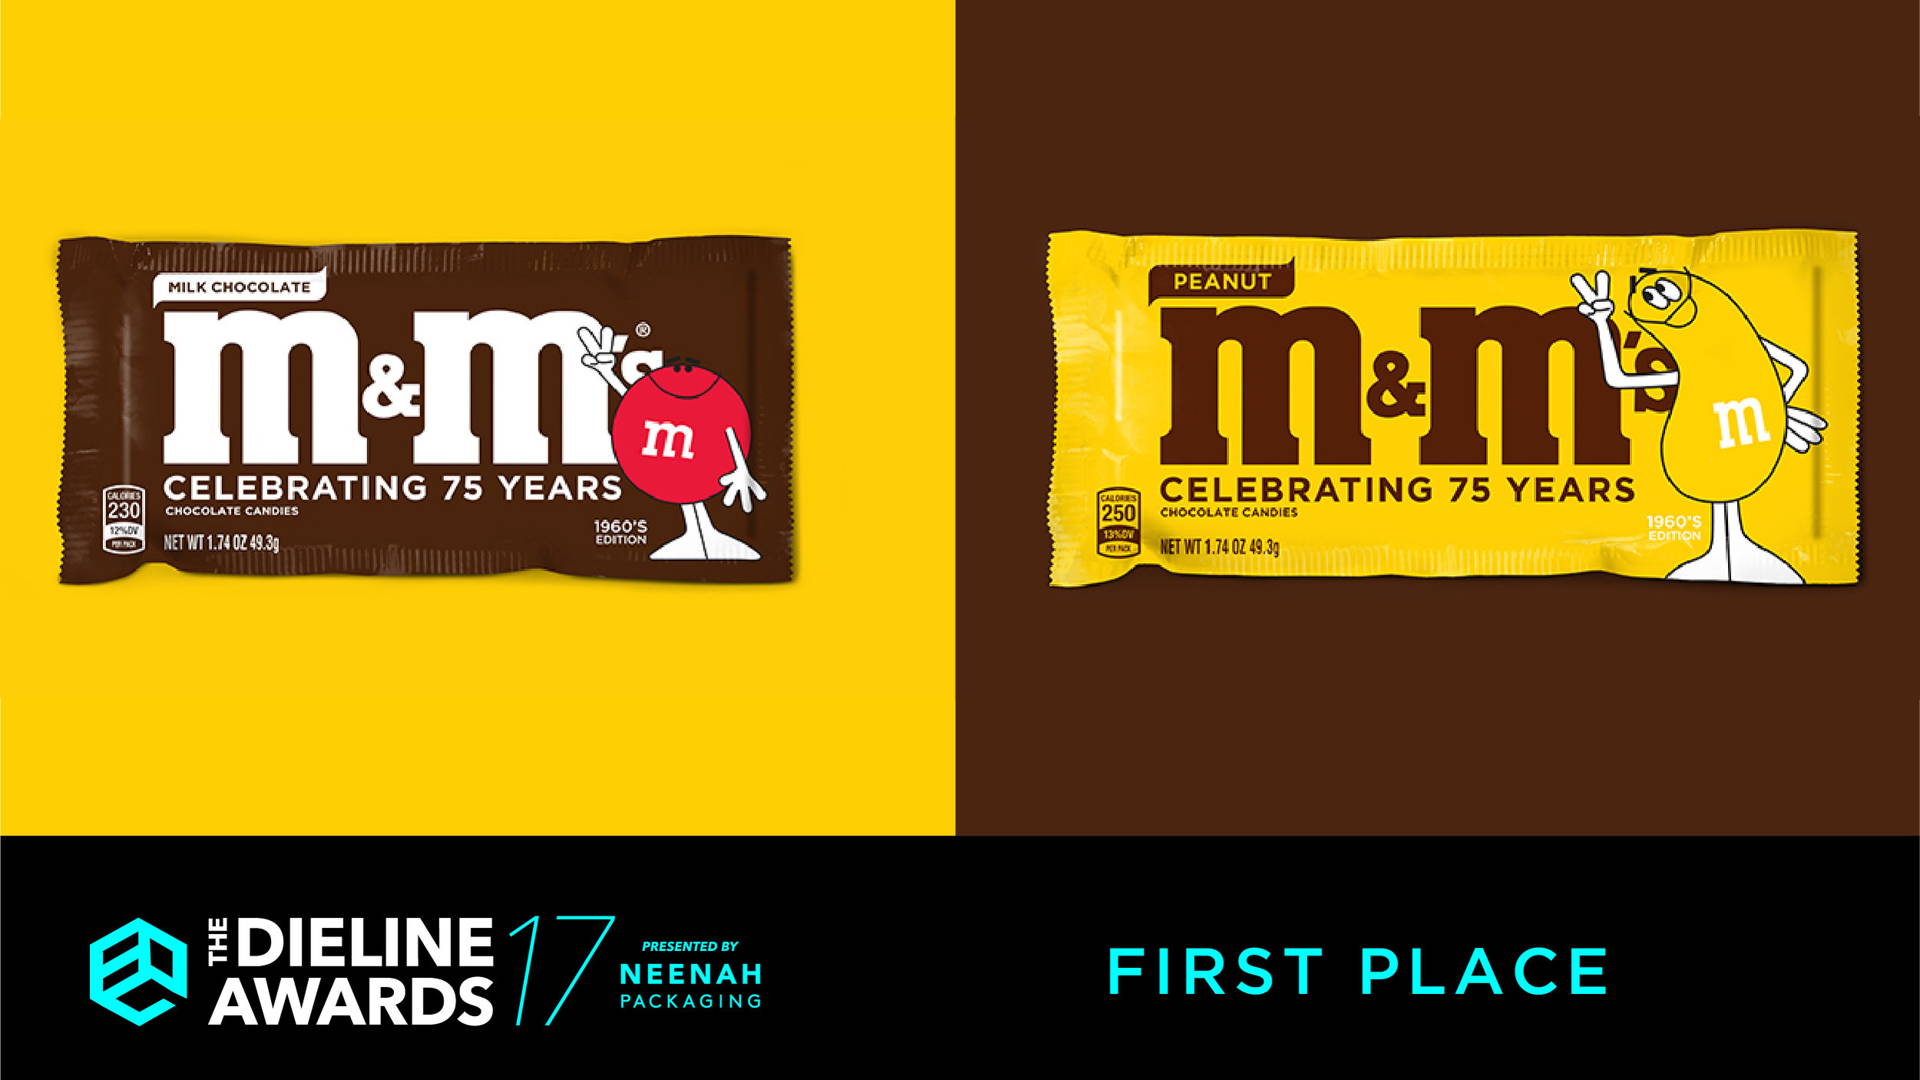 Featured image for The Dieline Awards 2017: M&M’S 75th Anniversary